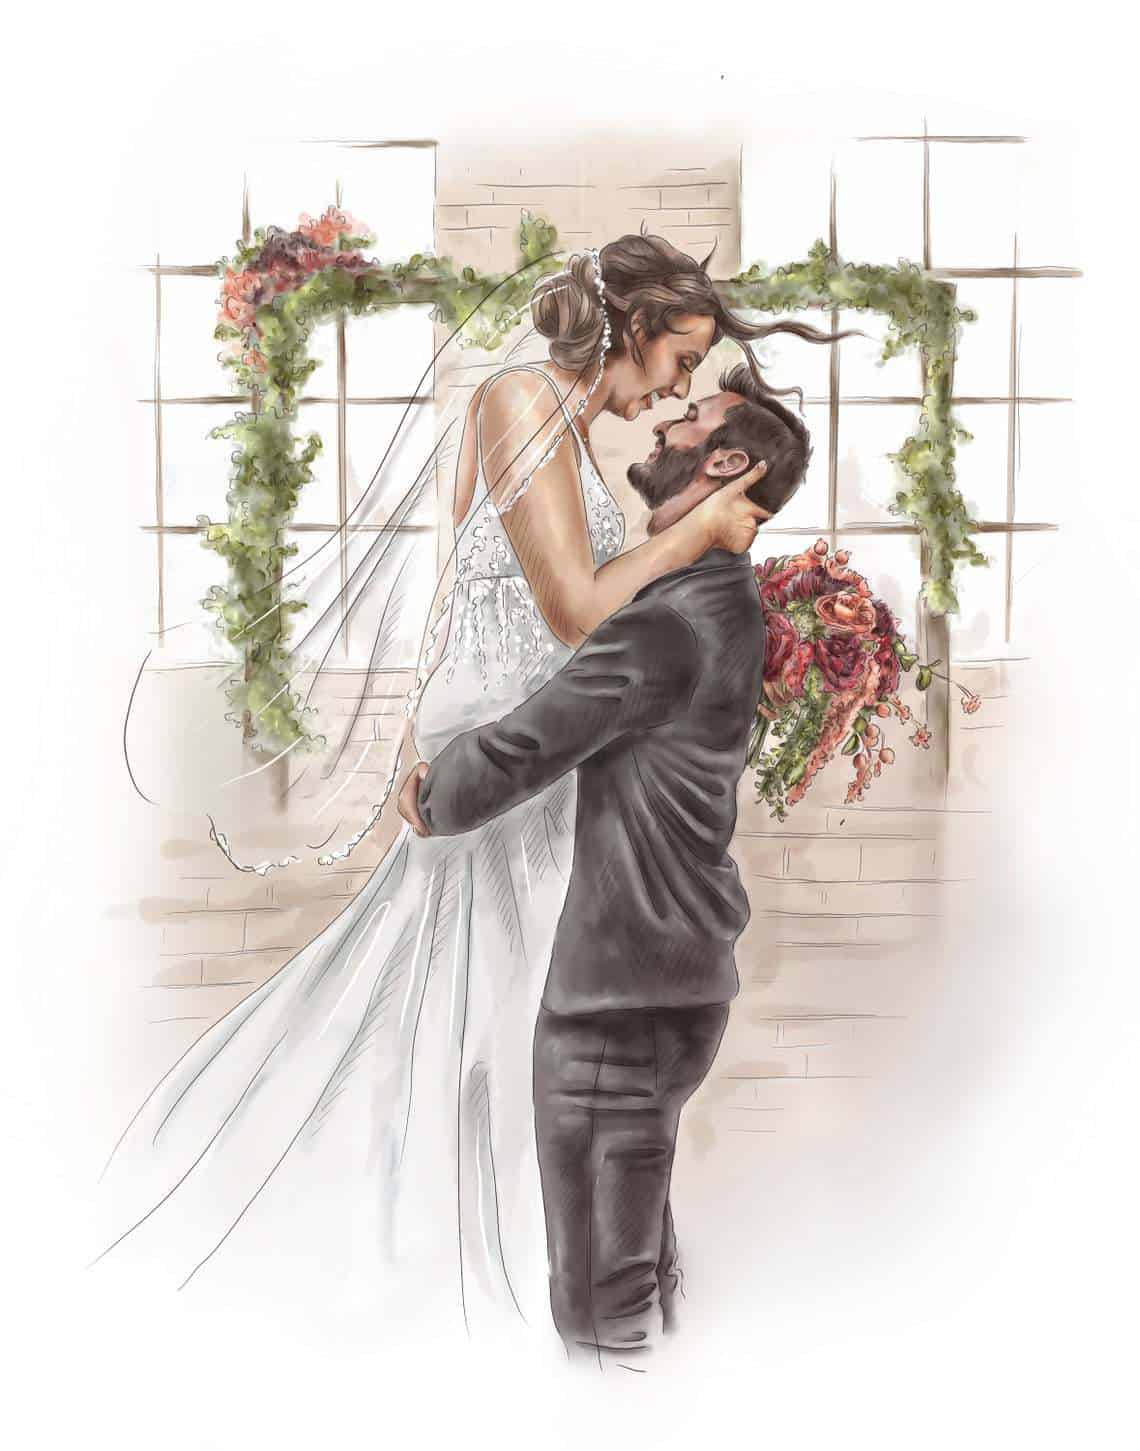 an illustration portrait of bride and groom